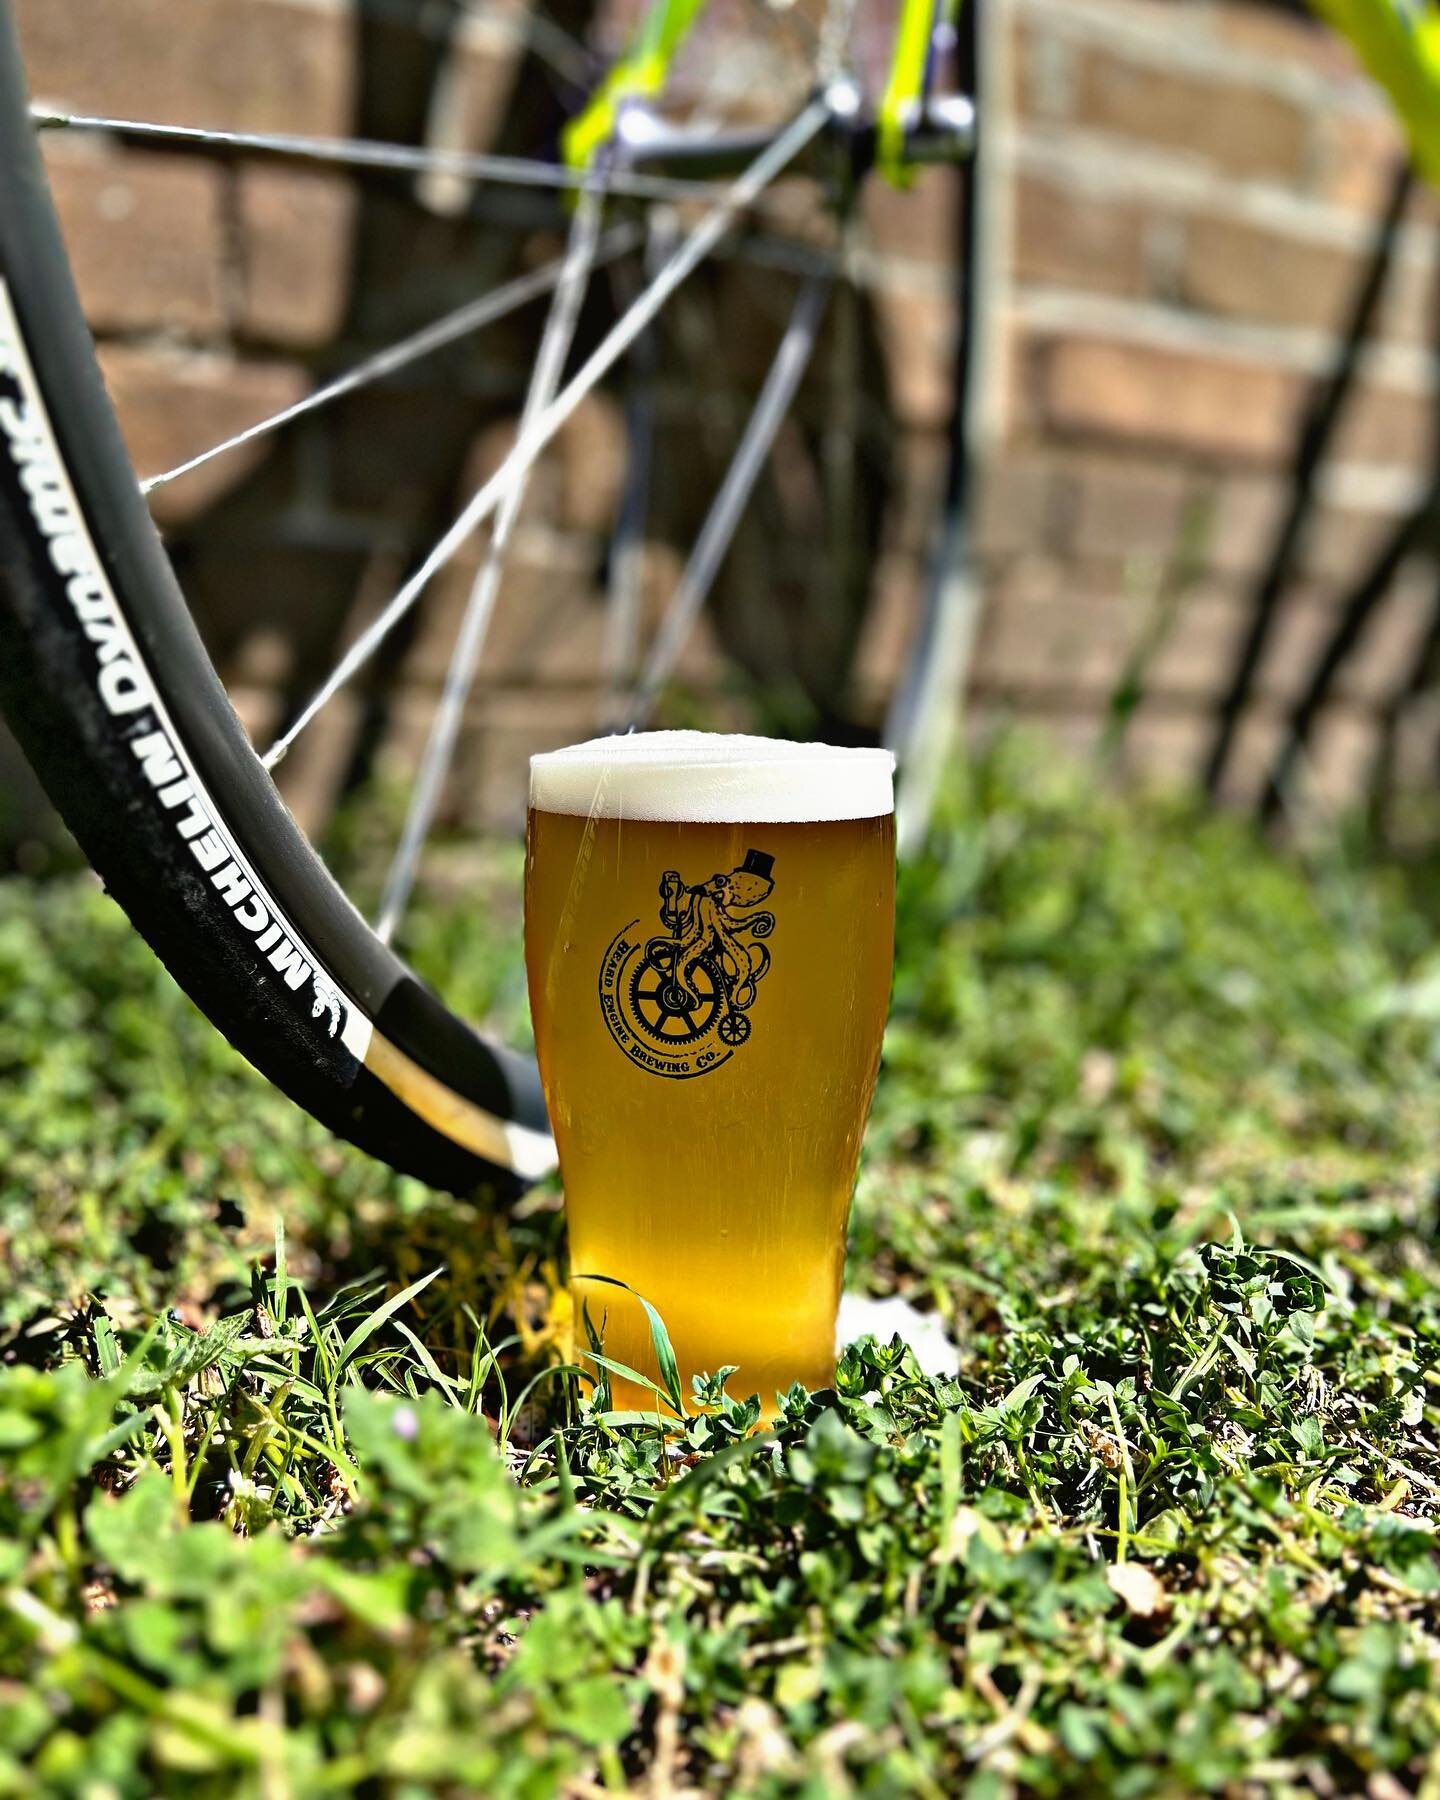 It&rsquo;s a beautiful day for a bicycle ride or a patio beer. Did you know you know we are 5K away from the Ruby Jack Trail. Take advantage of this weather. Bicyclists receive $1 off pours. We also have a 25mi fun Beard Engine cycle ride created by 